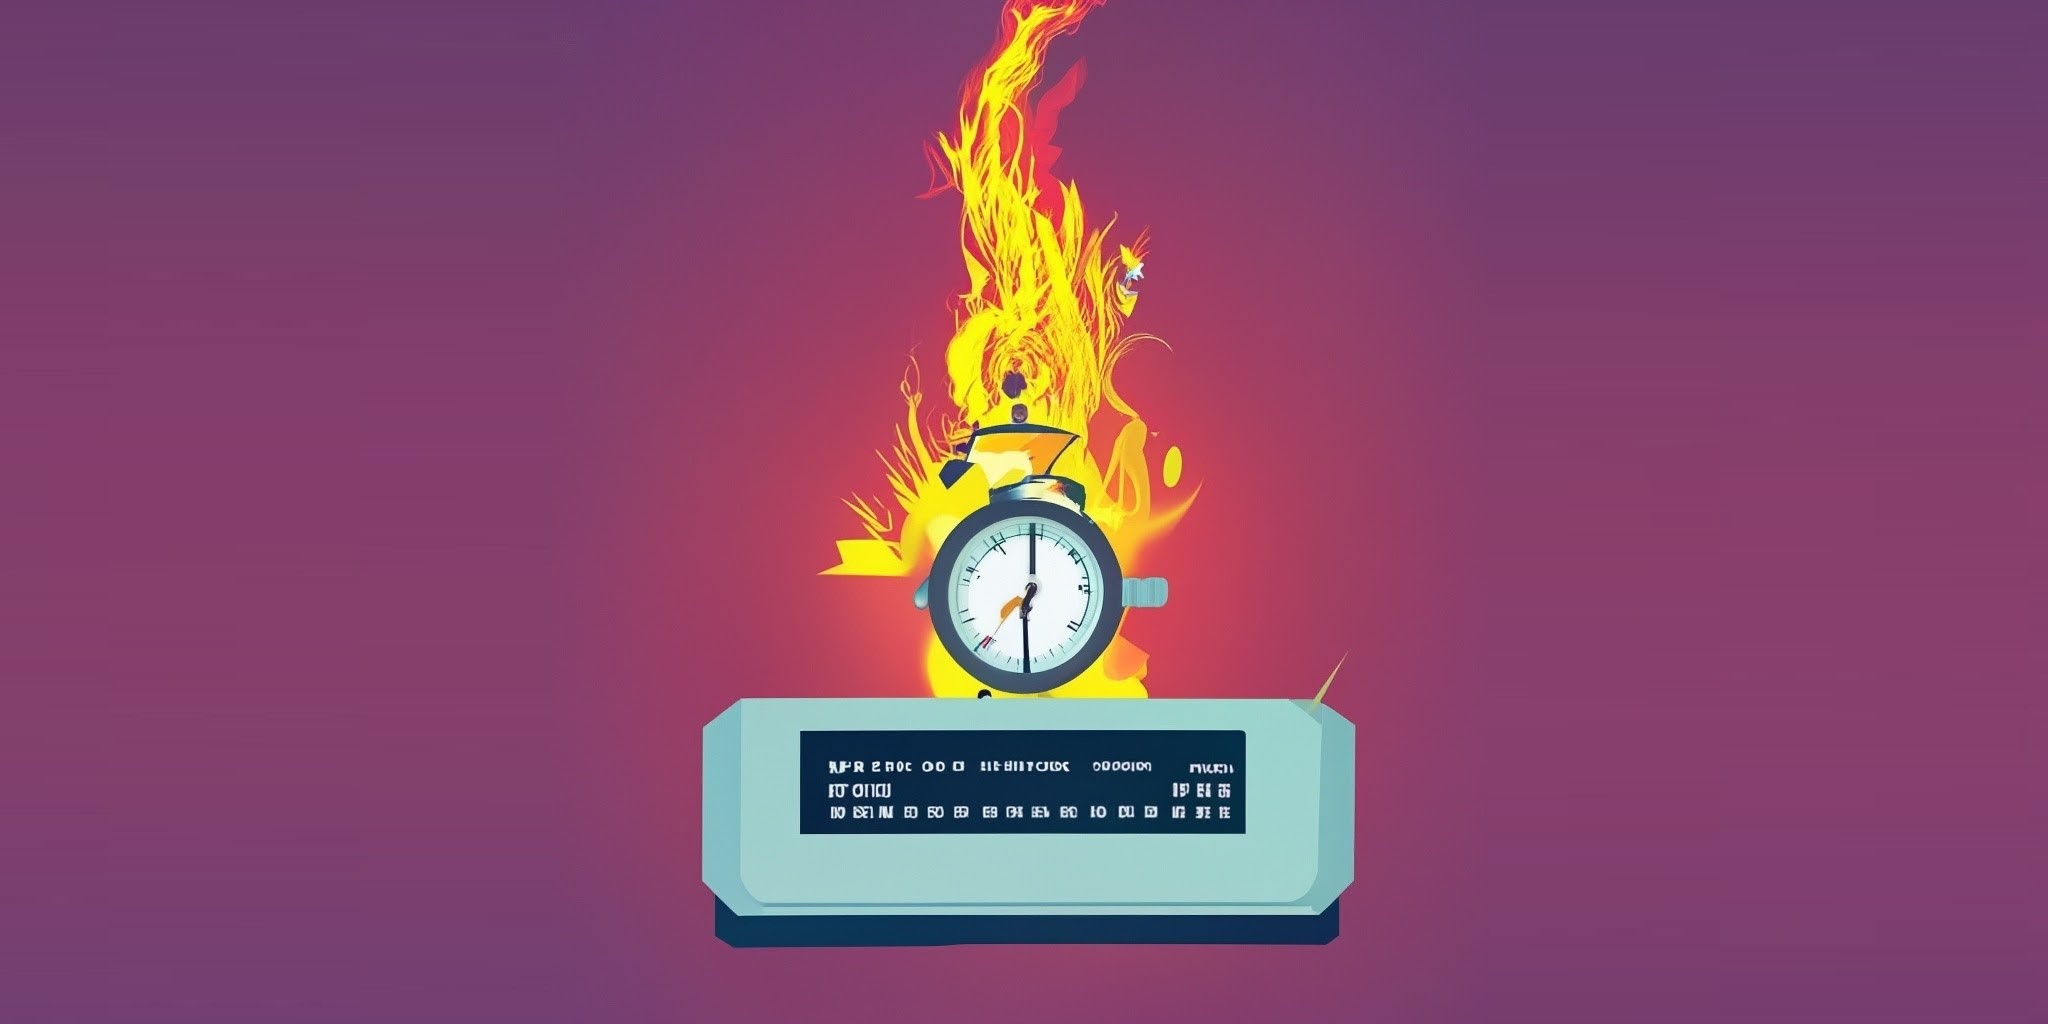 Trio of TorchServe flaws means PyTorch users need an urgent upgrade